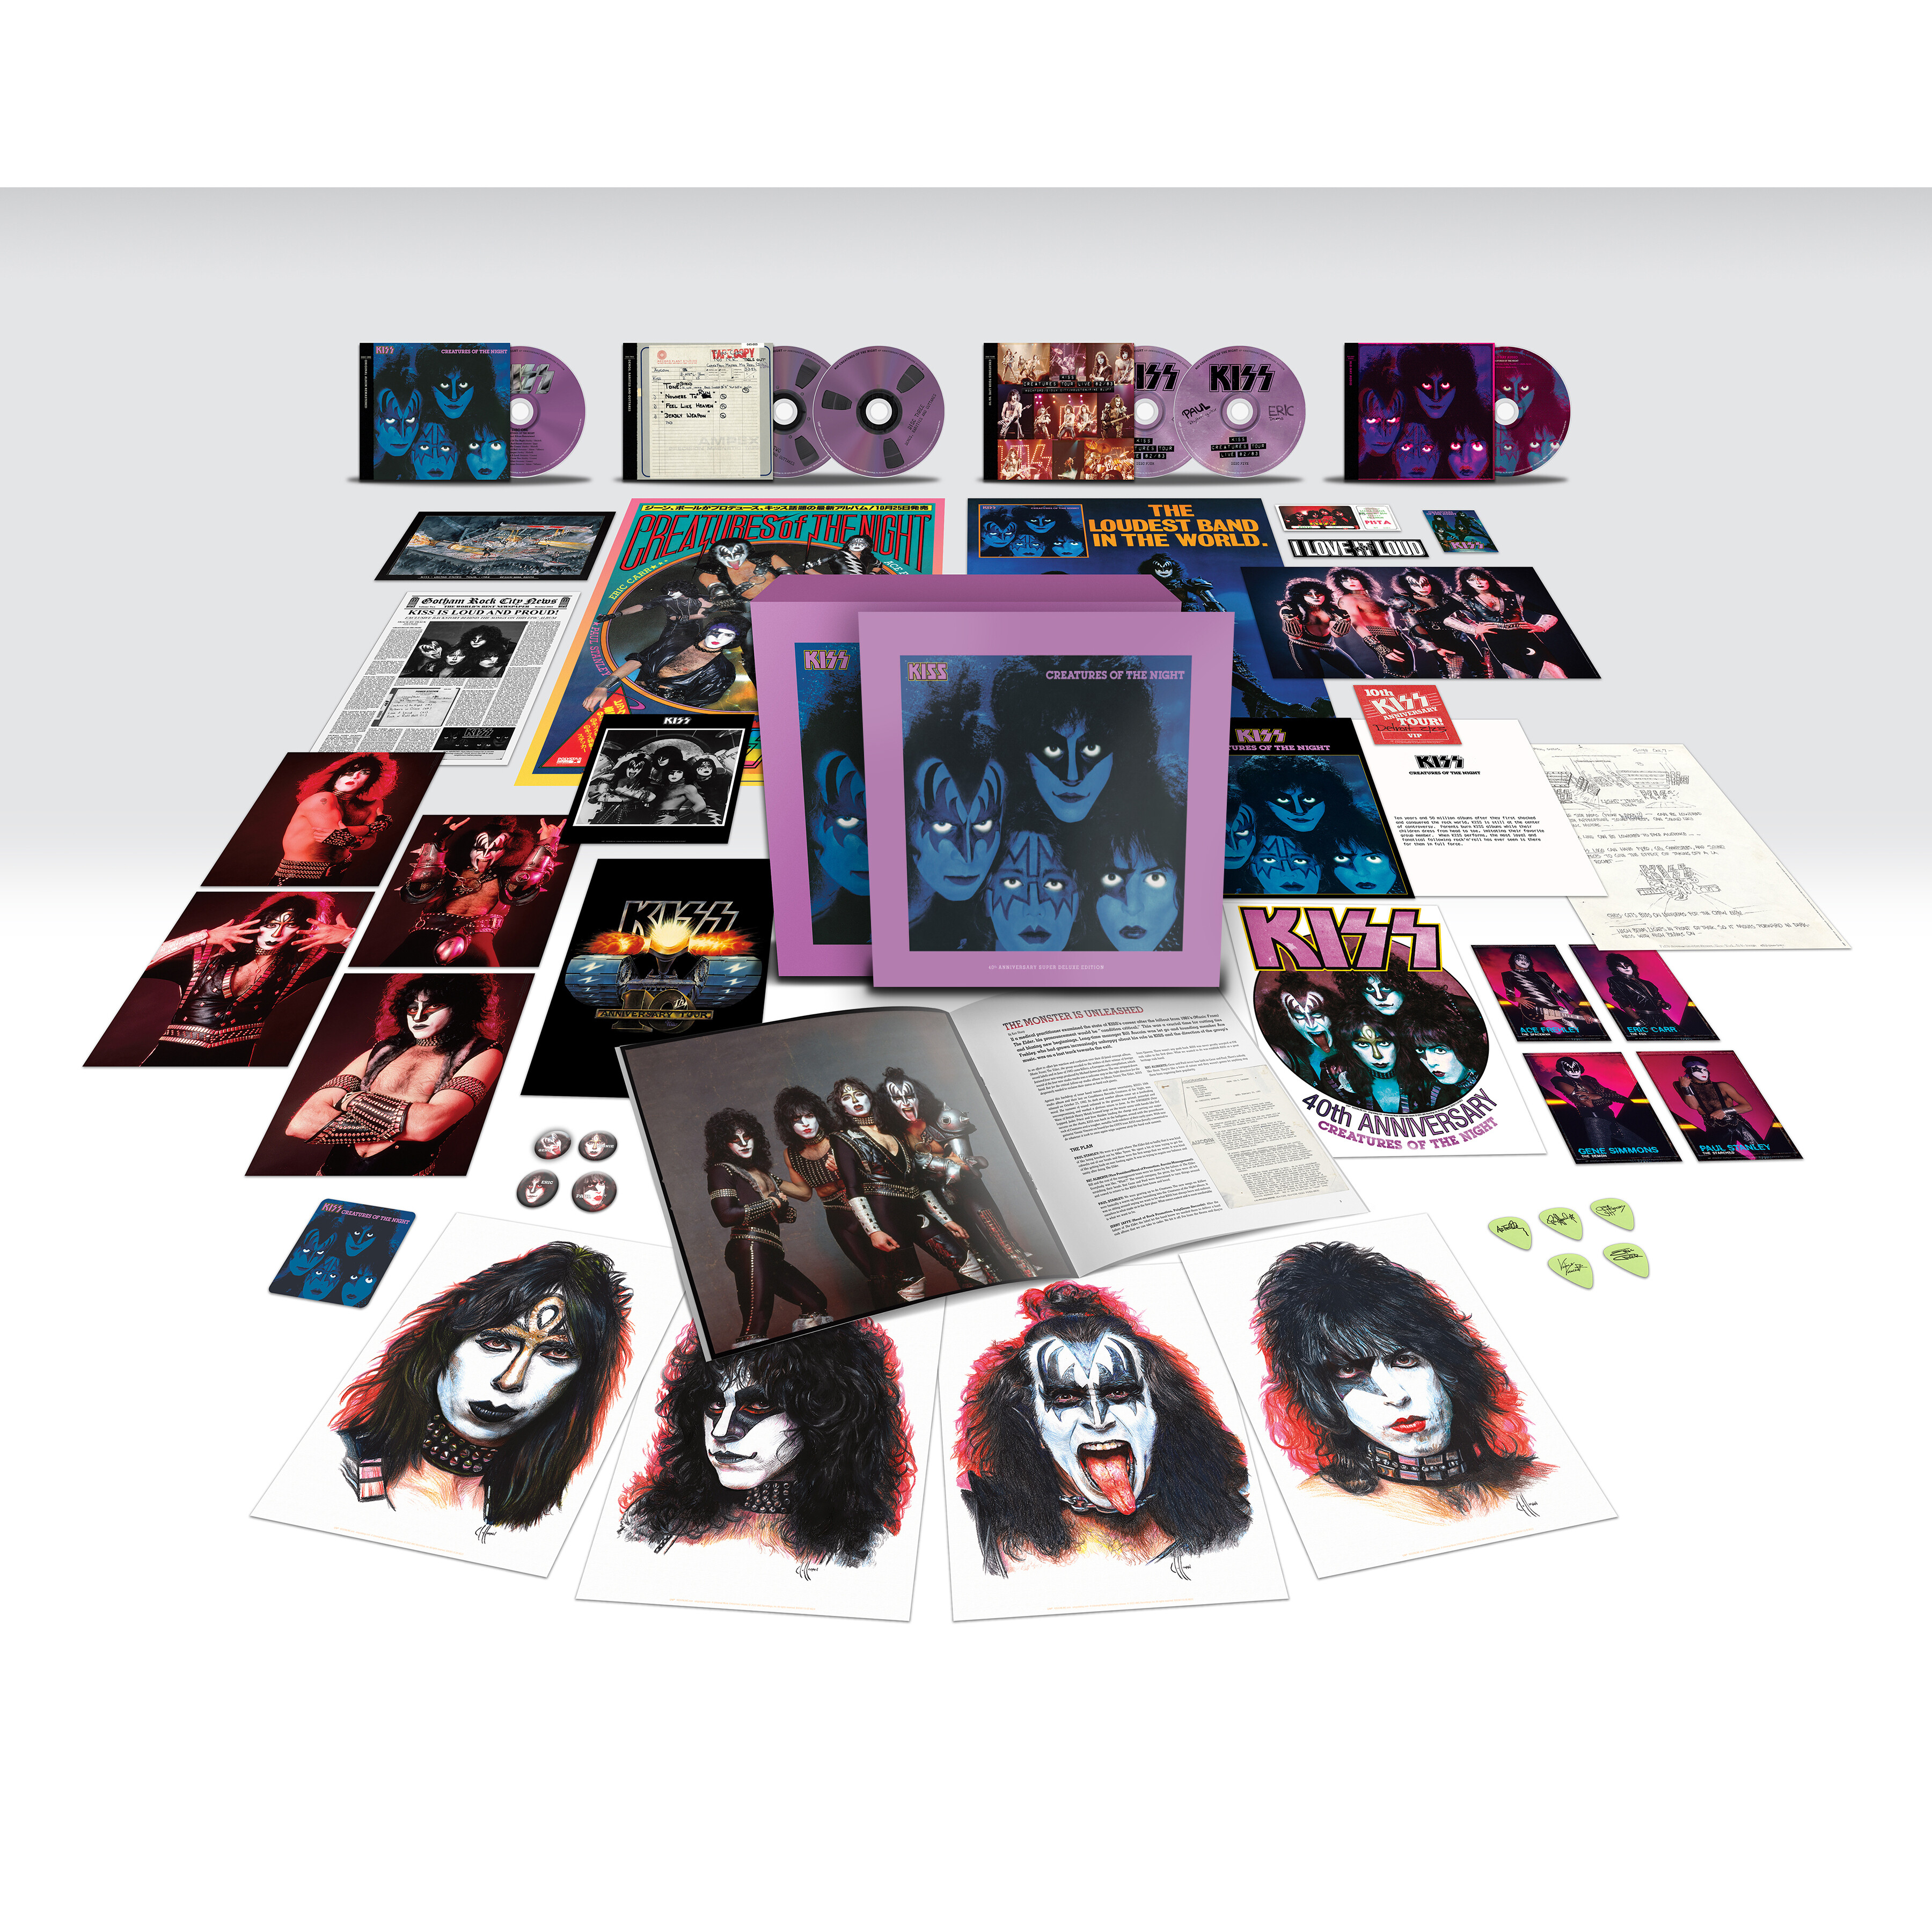 Anniversary　Super　Of　5CD　Deluxe　Edition)　The　Edition　Night　KISS　(40th　Blu-Ray　Bravado　Creatures